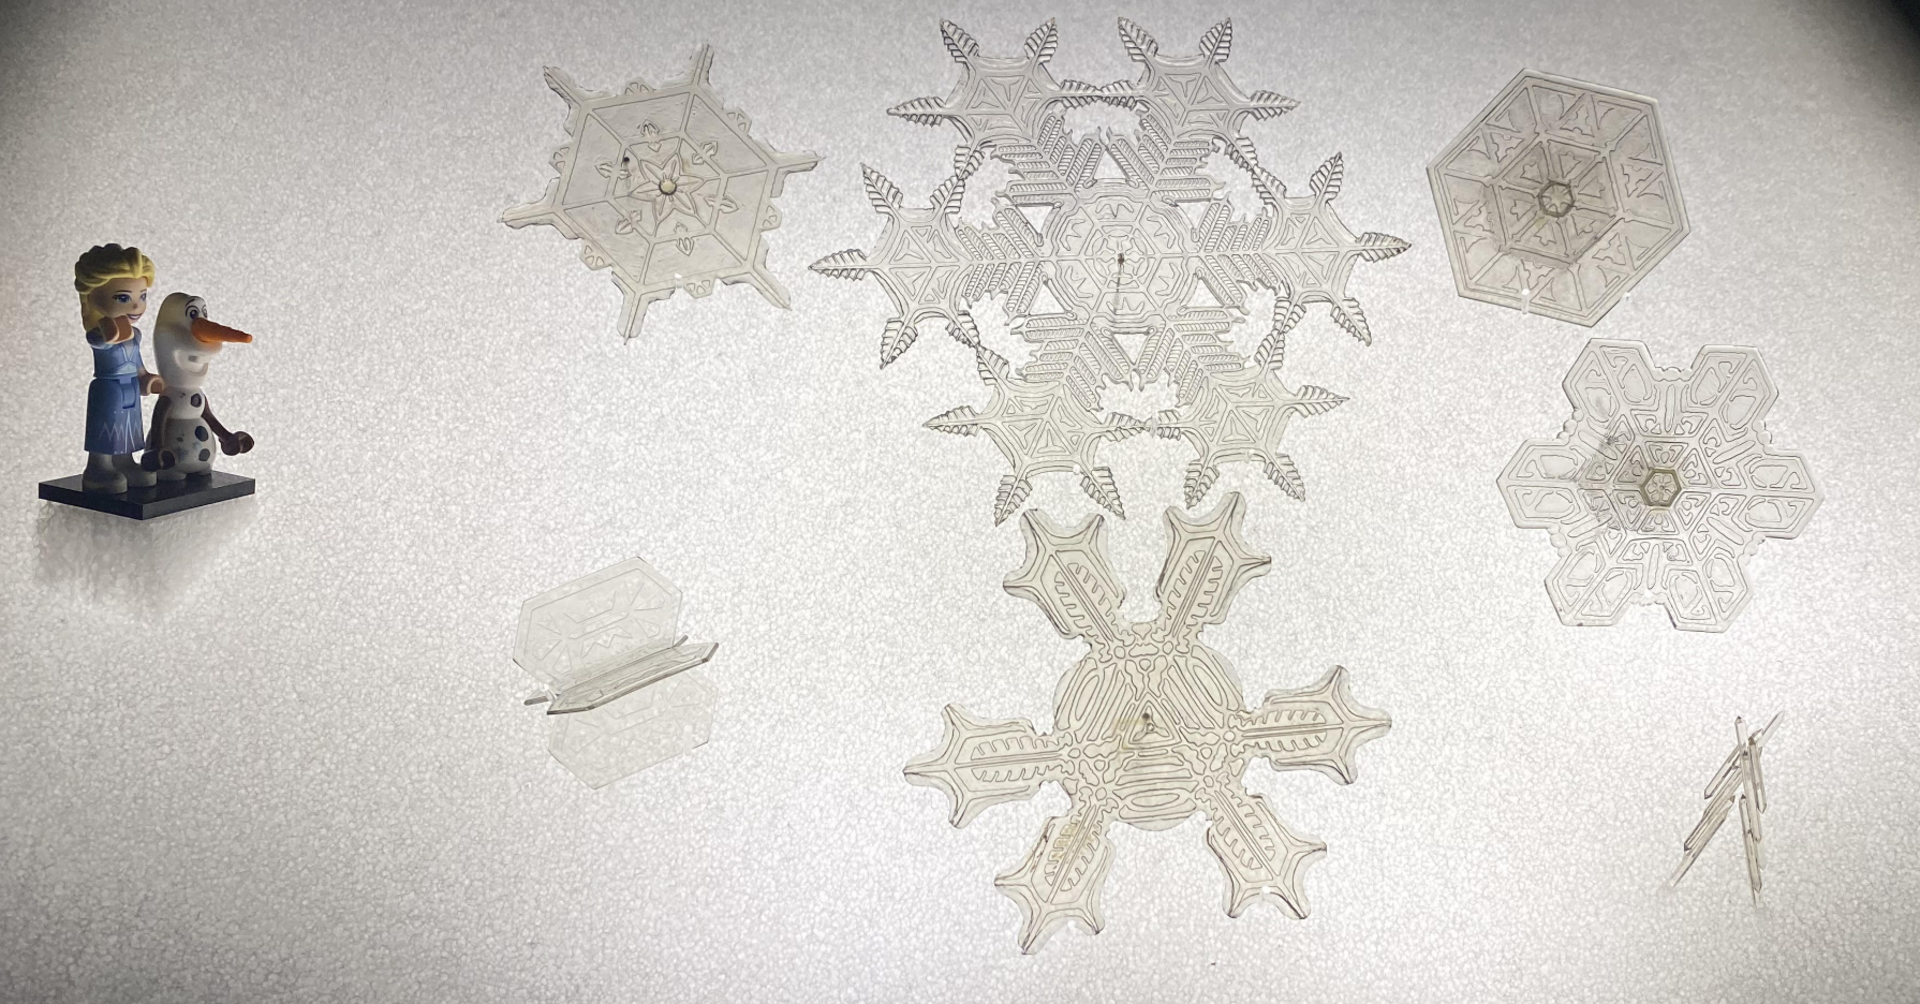 Nathan Coleman: These intricate models of snow crystals were created by Edwin Reiber for the Cranbrook Institute of Science (Michigan). The models were the "first accurate models of snow crystals"